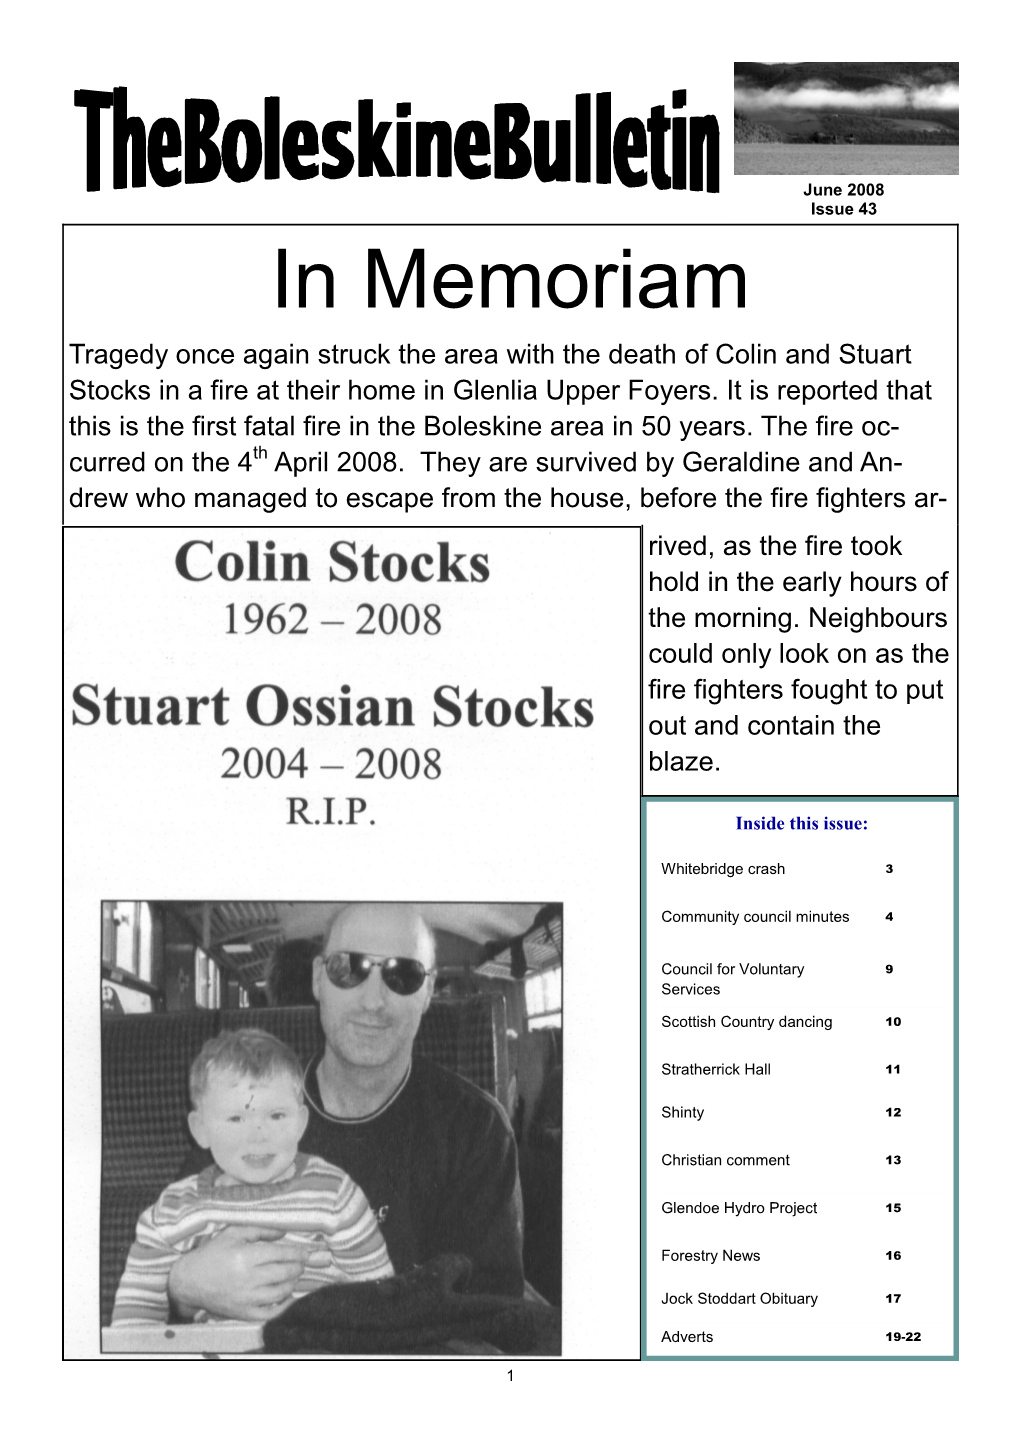 In Memoriam Tragedy Once Again Struck the Area with the Death of Colin and Stuart Stocks in a Fire at Their Home in Glenlia Upper Foyers